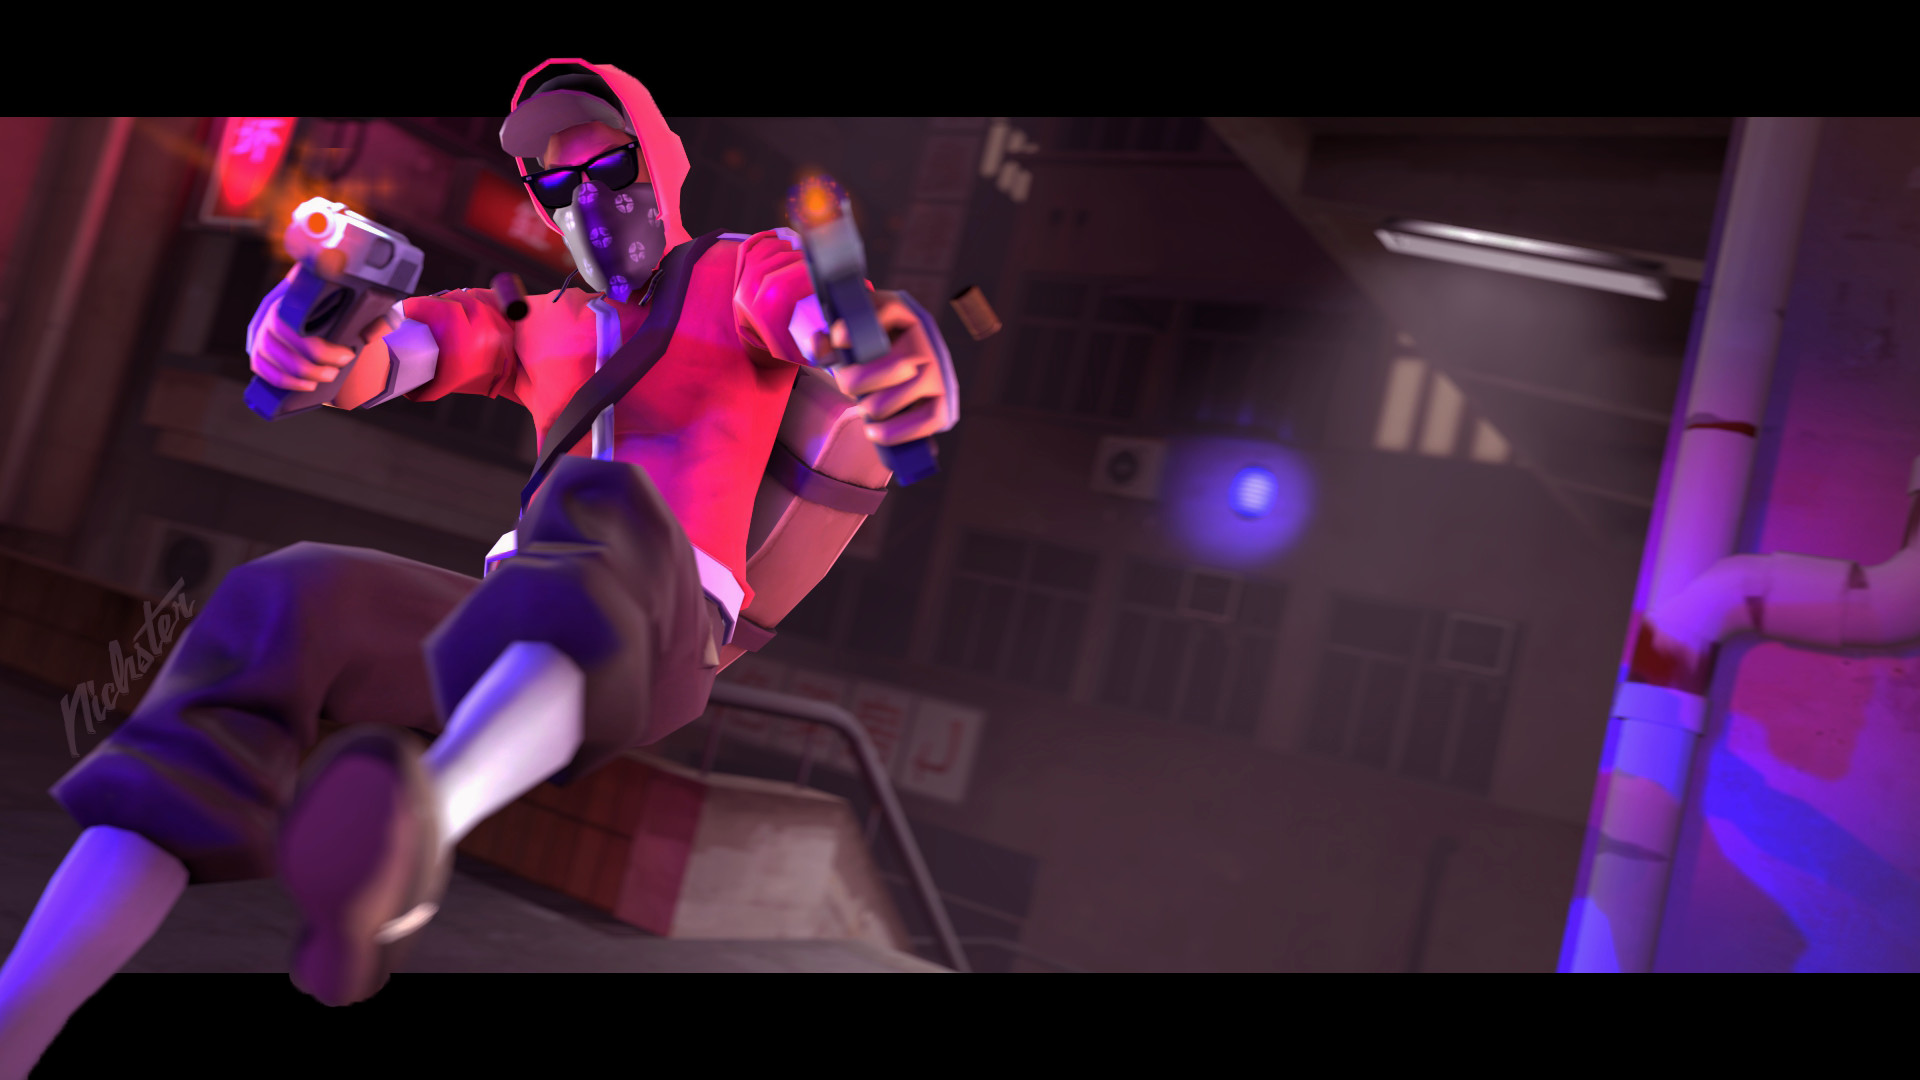 1920x1080 Scout SFM I Made on stream #games #teamfortress2 #steam #tf2  #SteamNewRelease #gaming #Valve